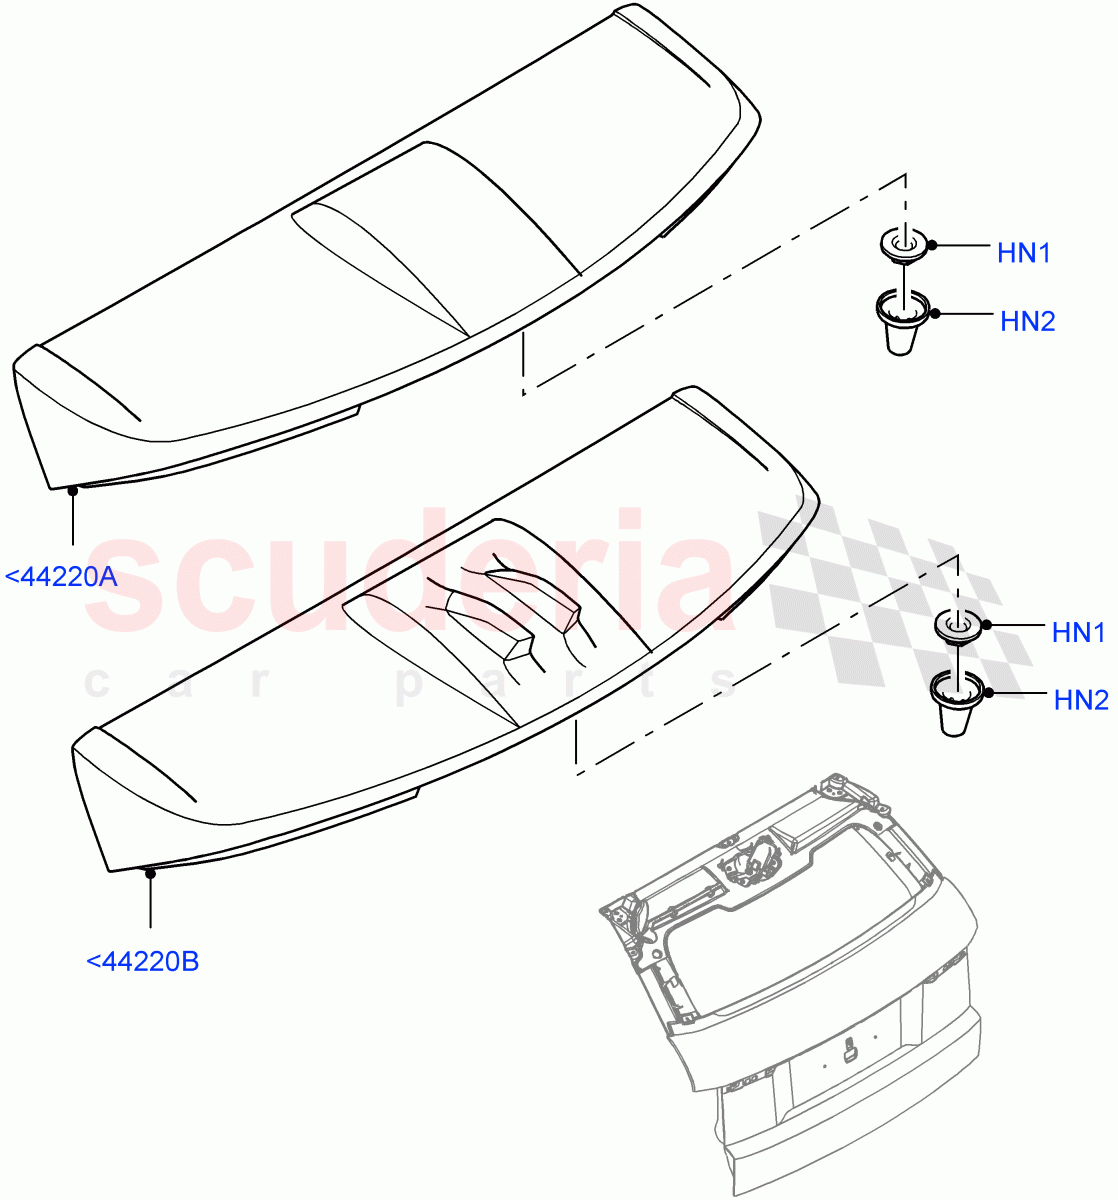 Spoiler And Related Parts(5 Door,Halewood (UK),3 Door)((V)FROMHH000001,(V)TOHH999999) of Land Rover Land Rover Range Rover Evoque (2012-2018) [2.0 Turbo Diesel]